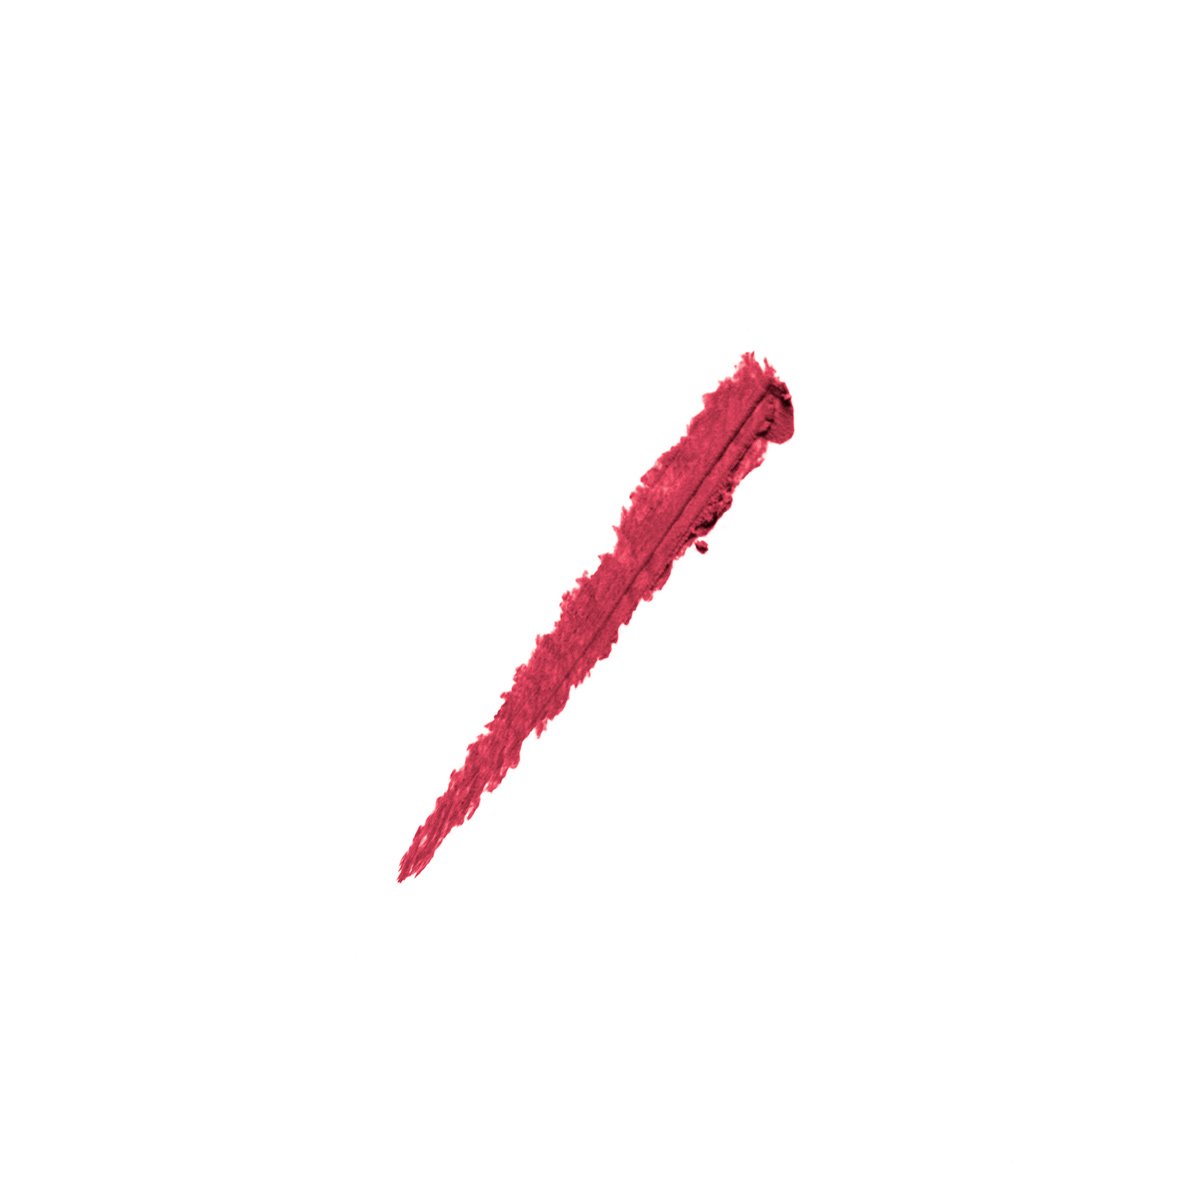 EMBRASSES MOI - UNIVERSAL RED - swatch of long-wearing lip liner in universal red shade